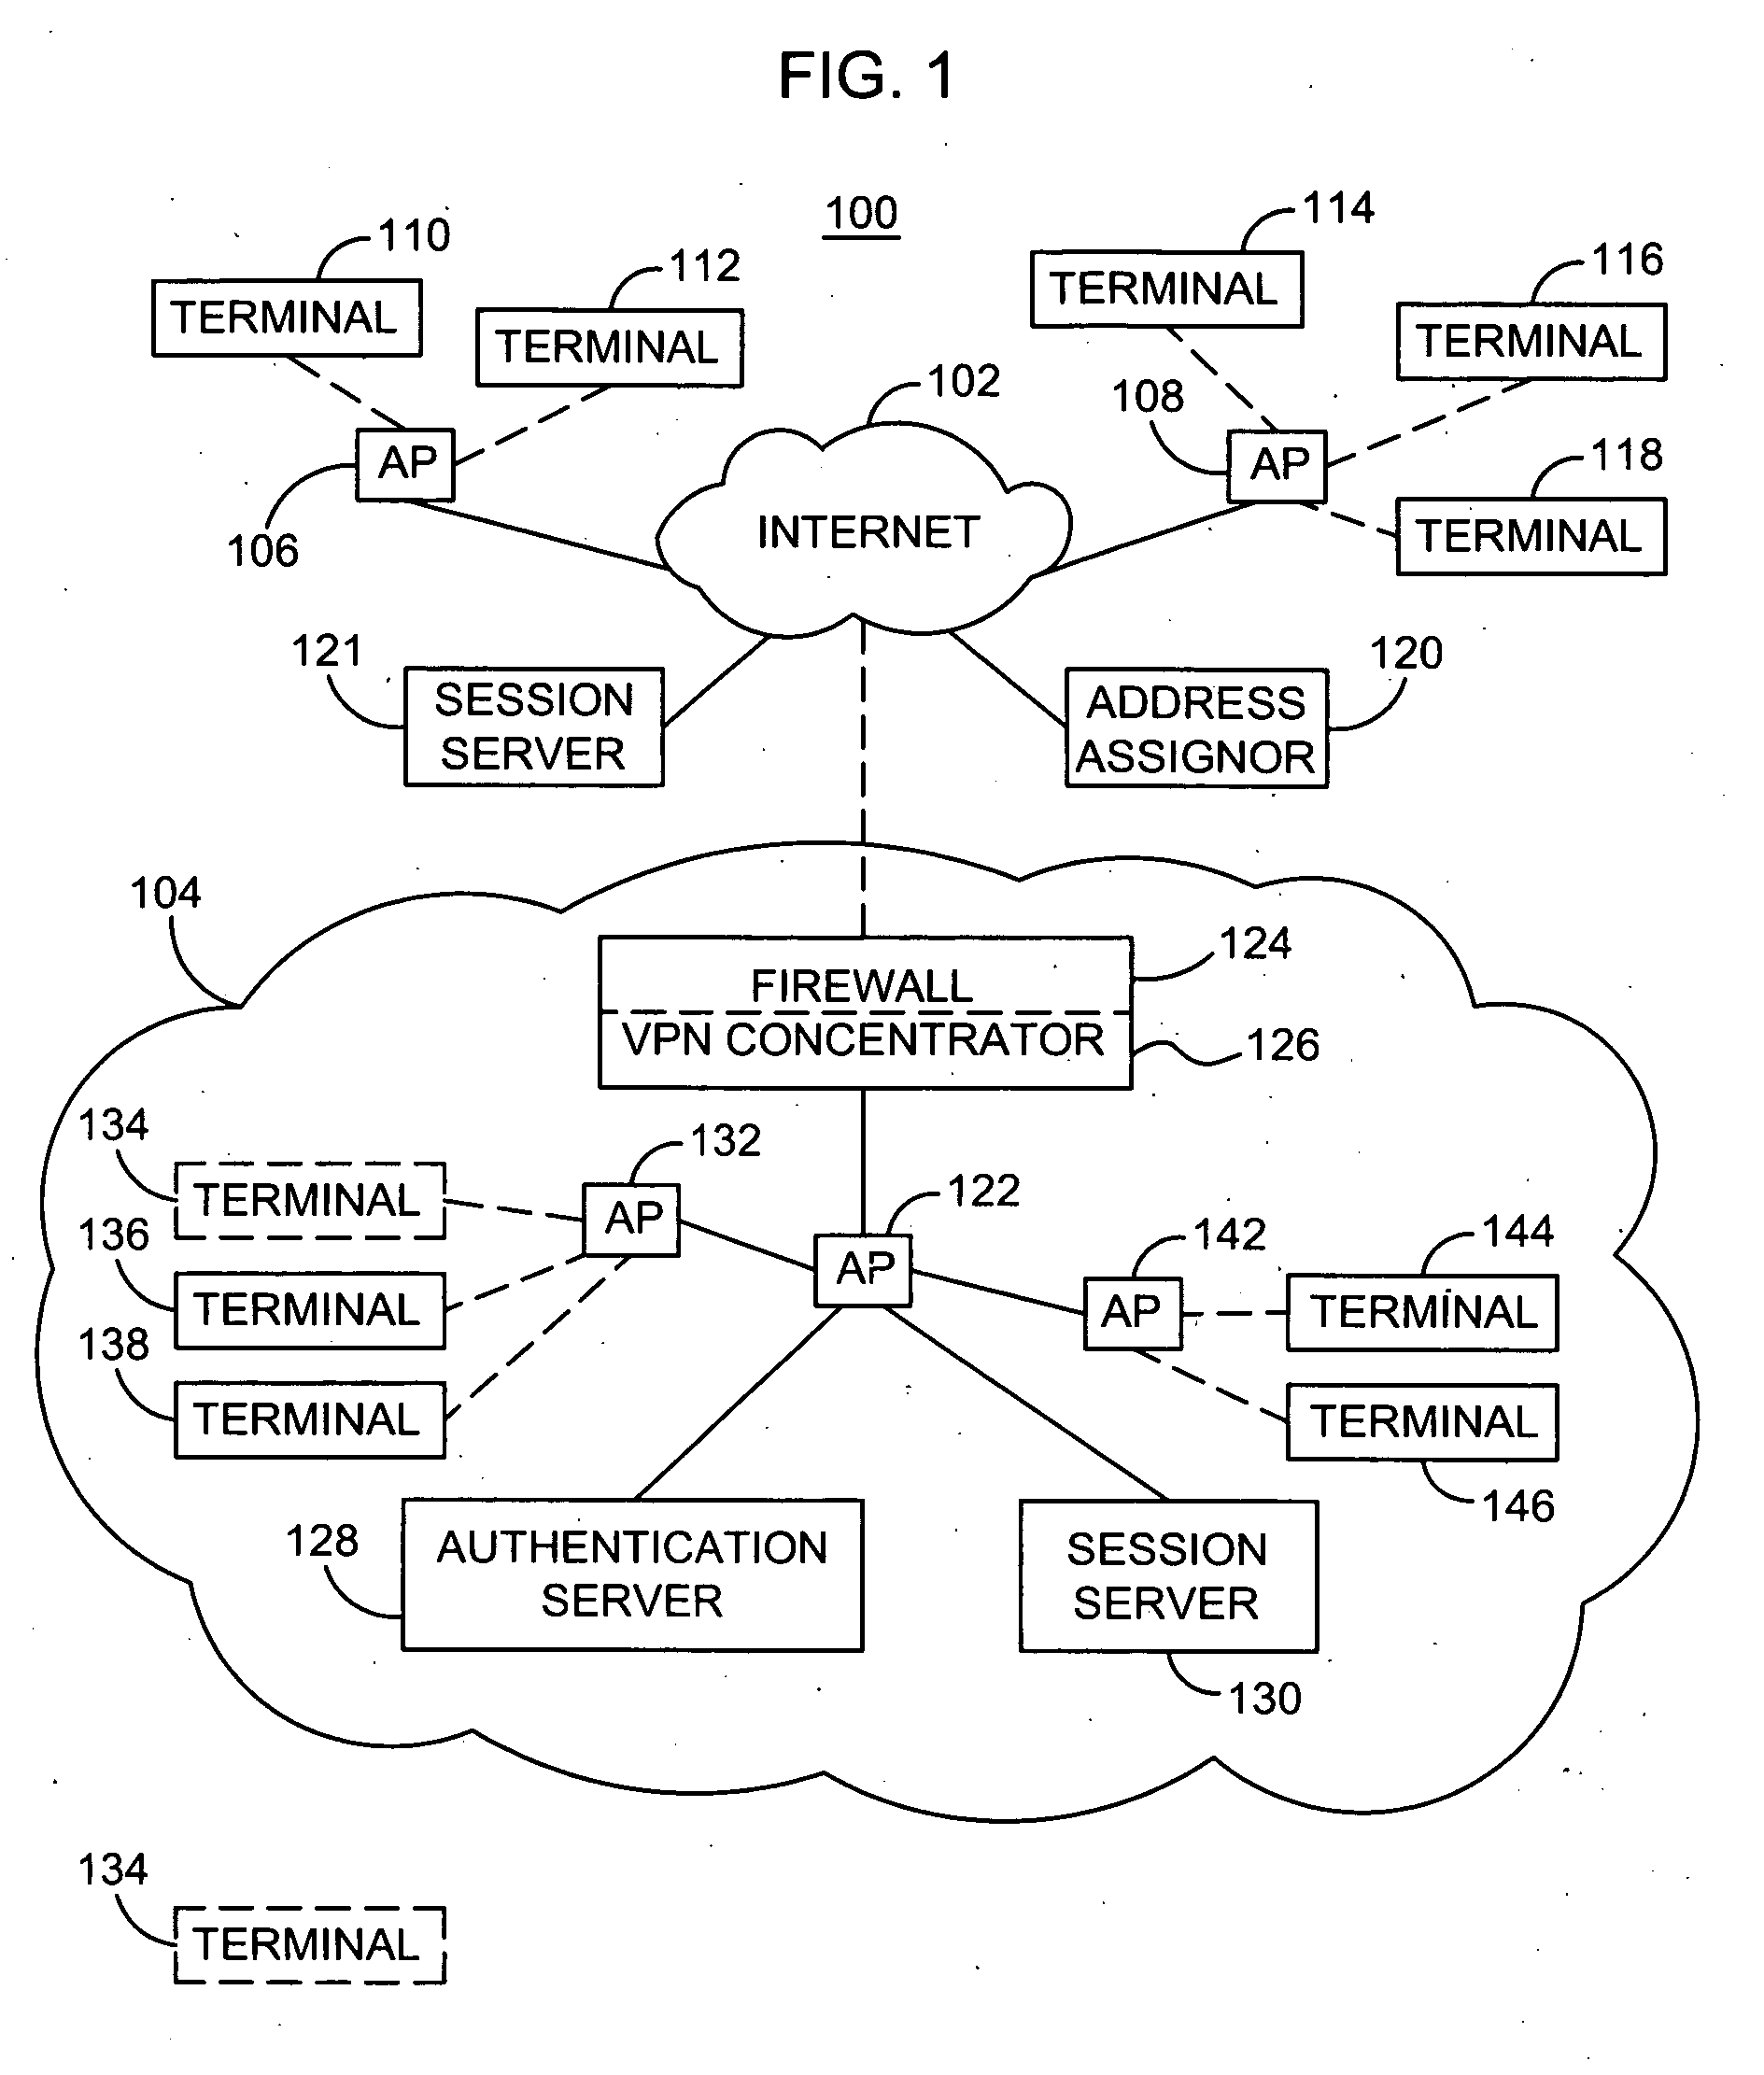 Methods and apparatus for reducing power consumption during network scanning operations with adverse battery conditions